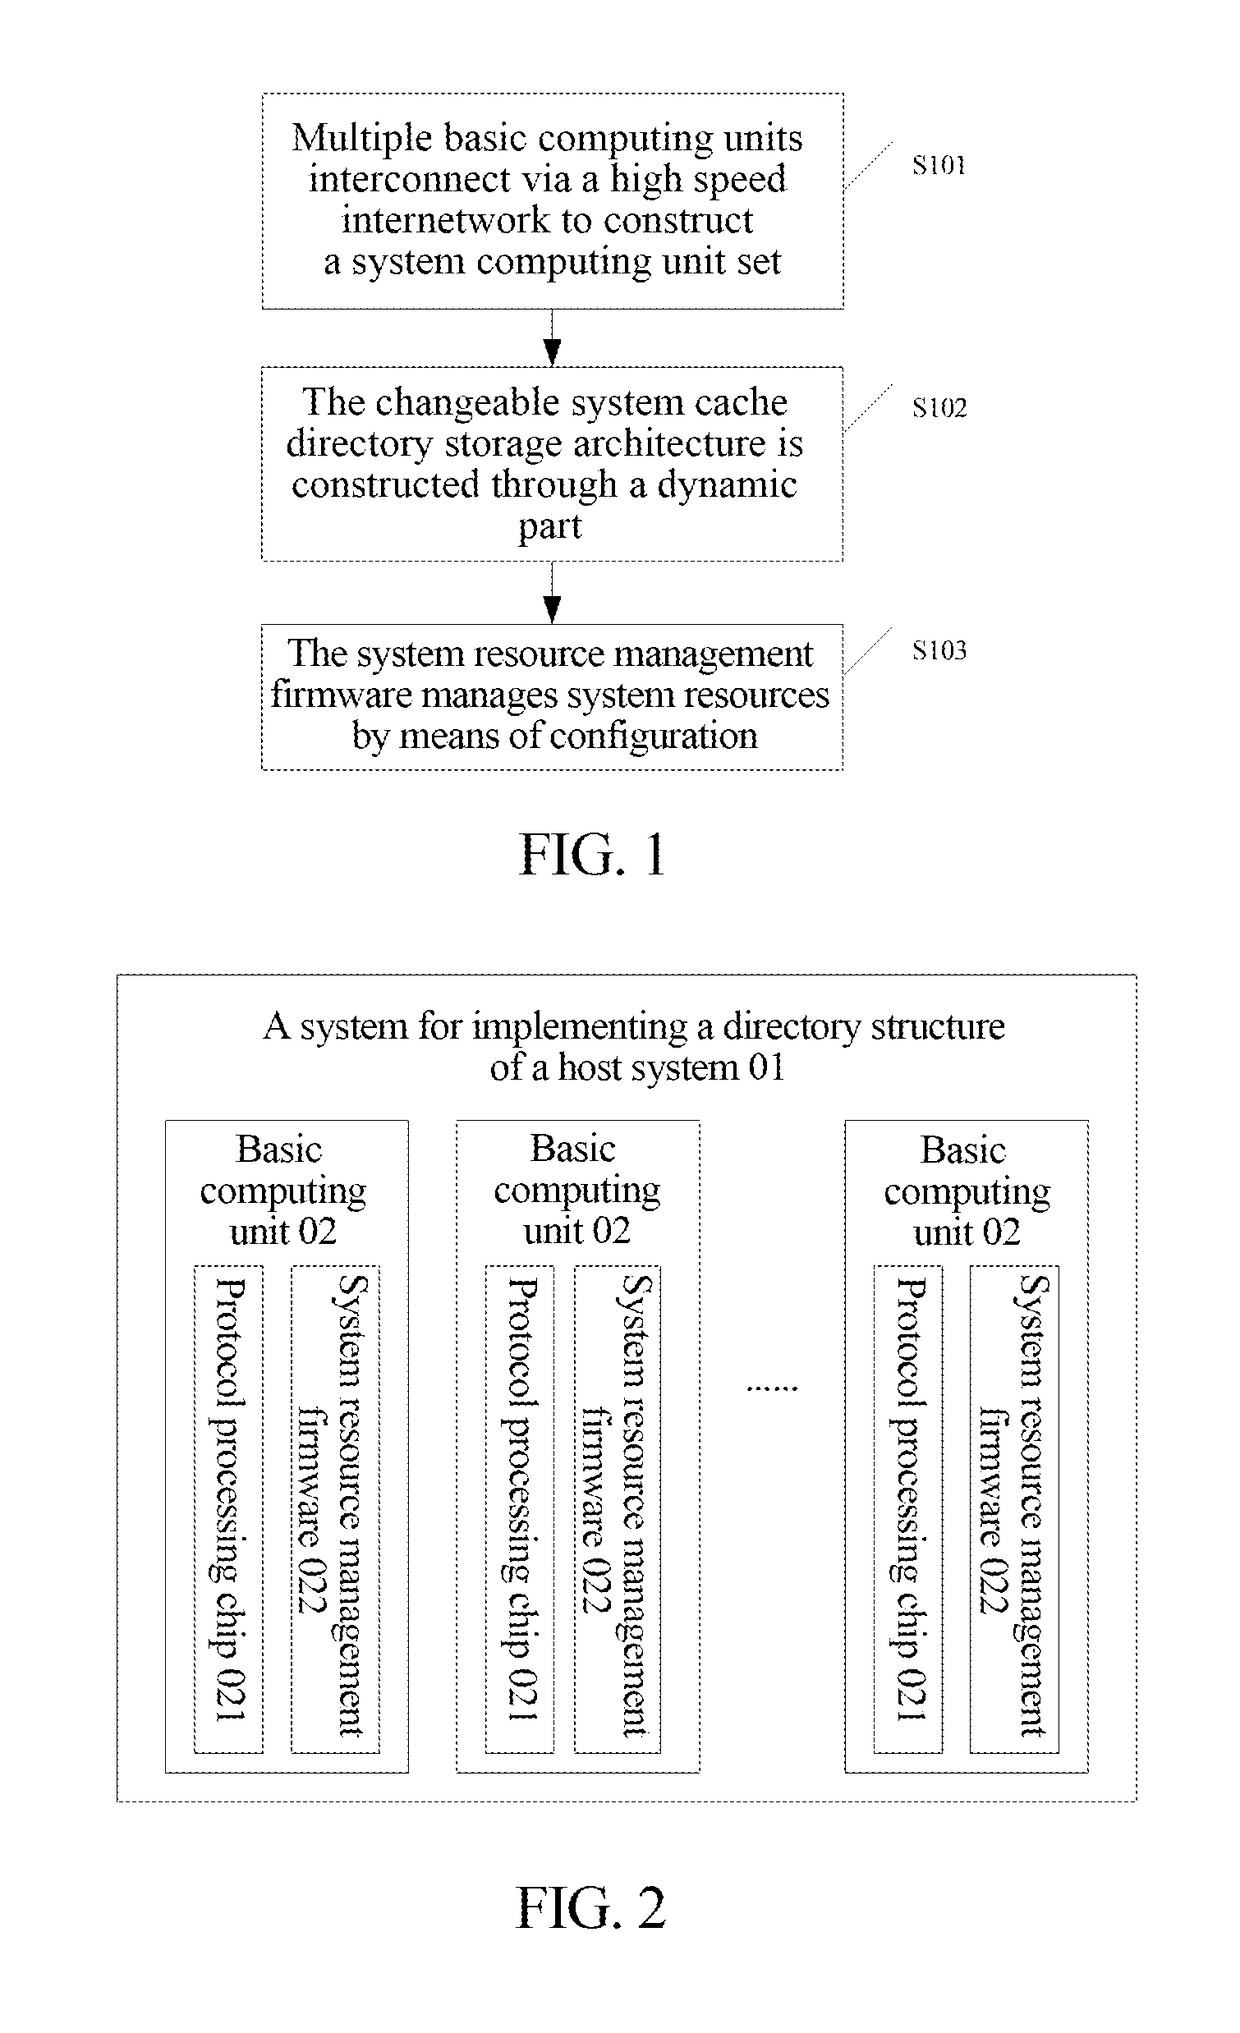 Method and system for implementing directory structure of host system